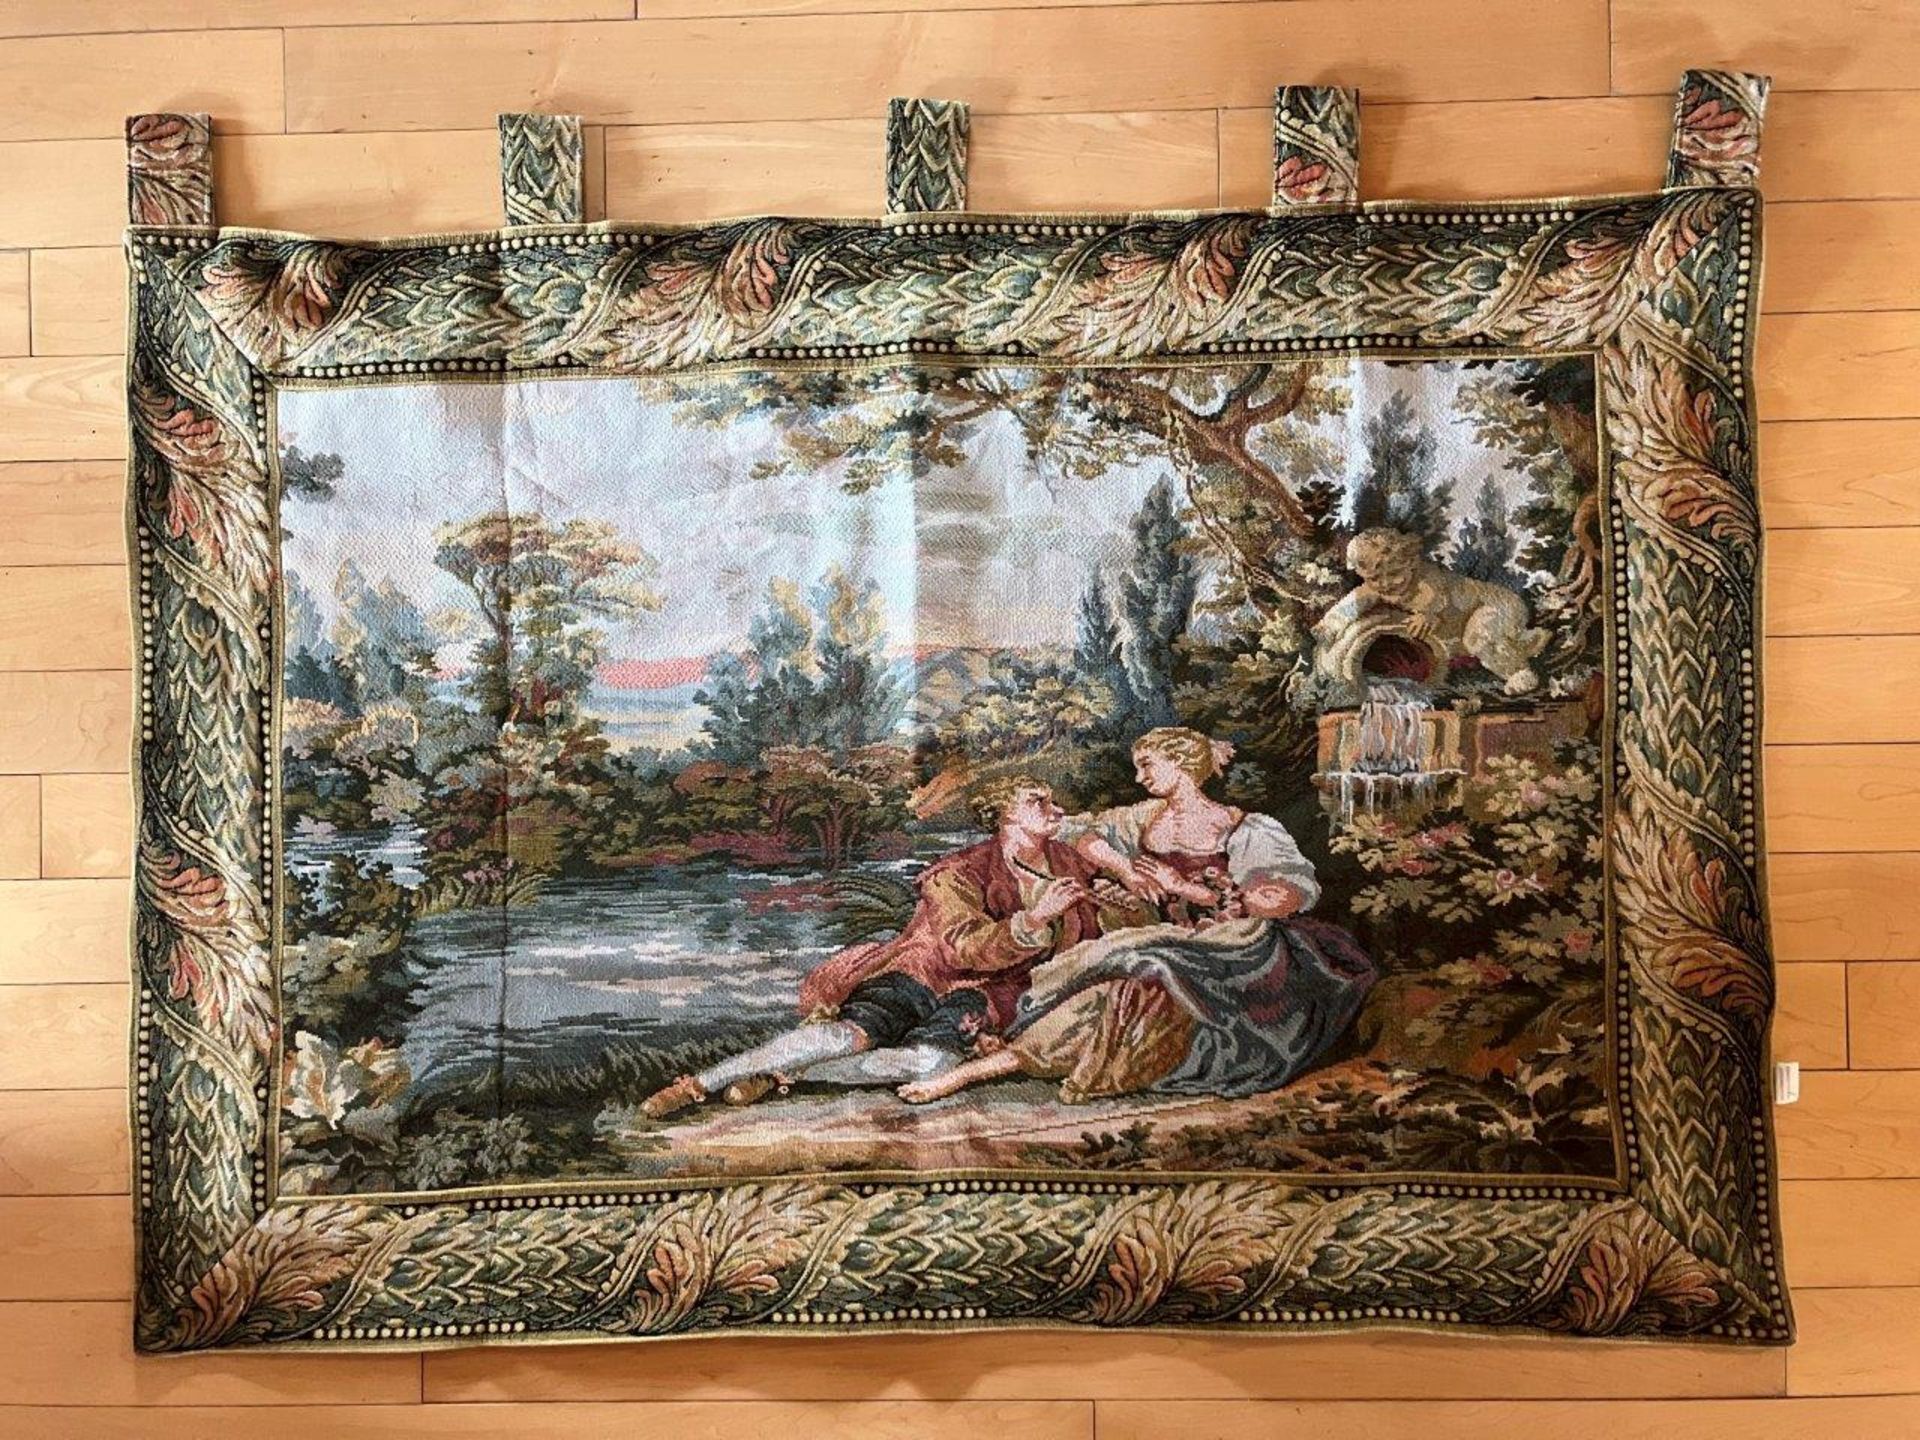 TAPESTRY WALL HANGING